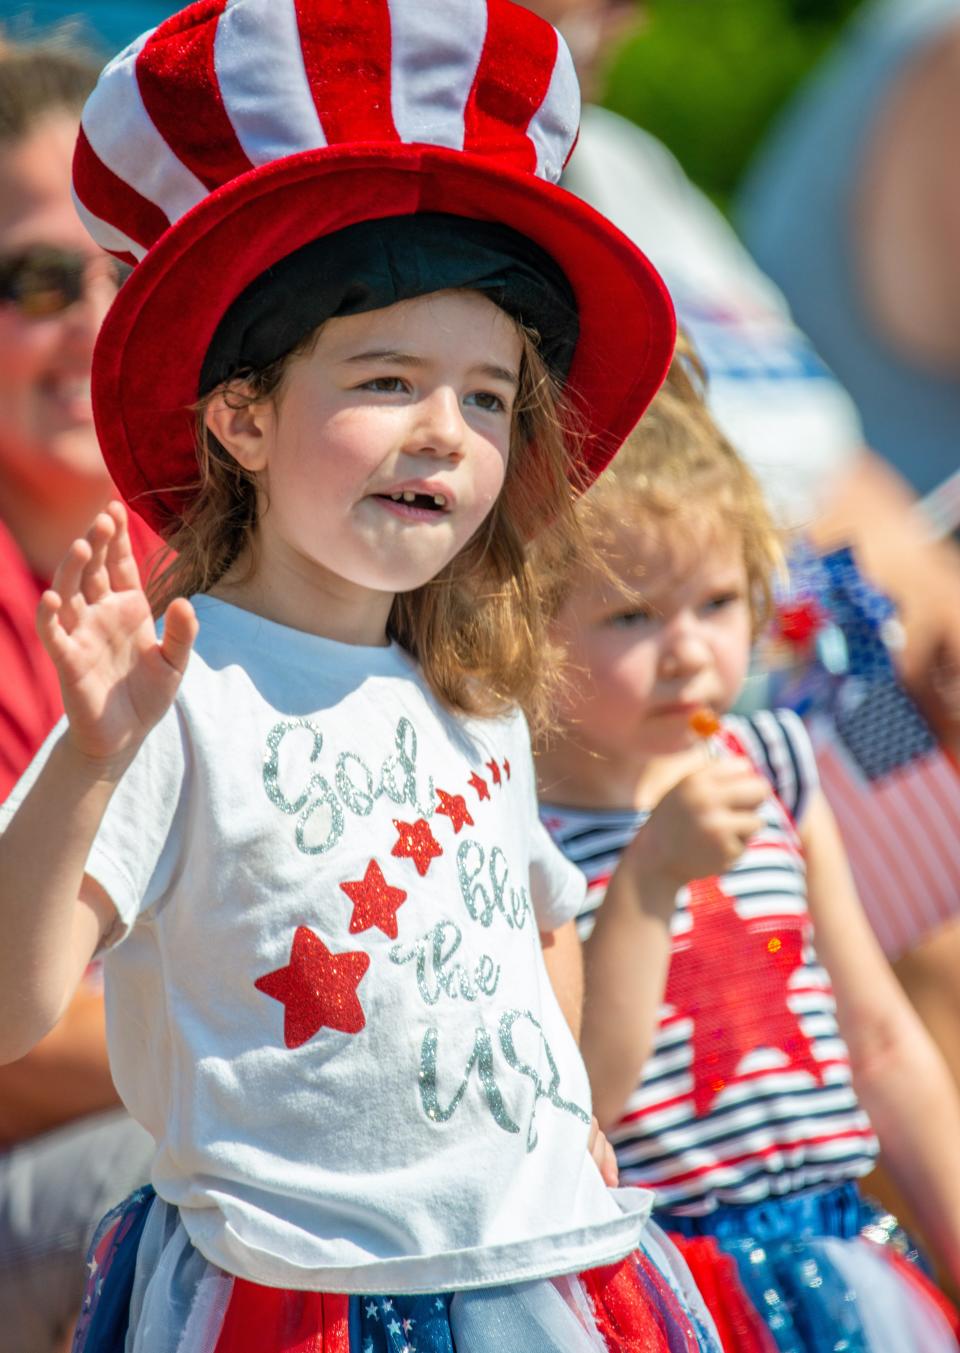 From left, Autumn Wray, 6, and May Wray, 3, watch the Southampton Days Independence Day Parade Monday, July 5, 2021 at Second Street Pike. Hundreds gathered for the Independence Day celebration, which was canceled last year due to the COVID-19 pandemic.